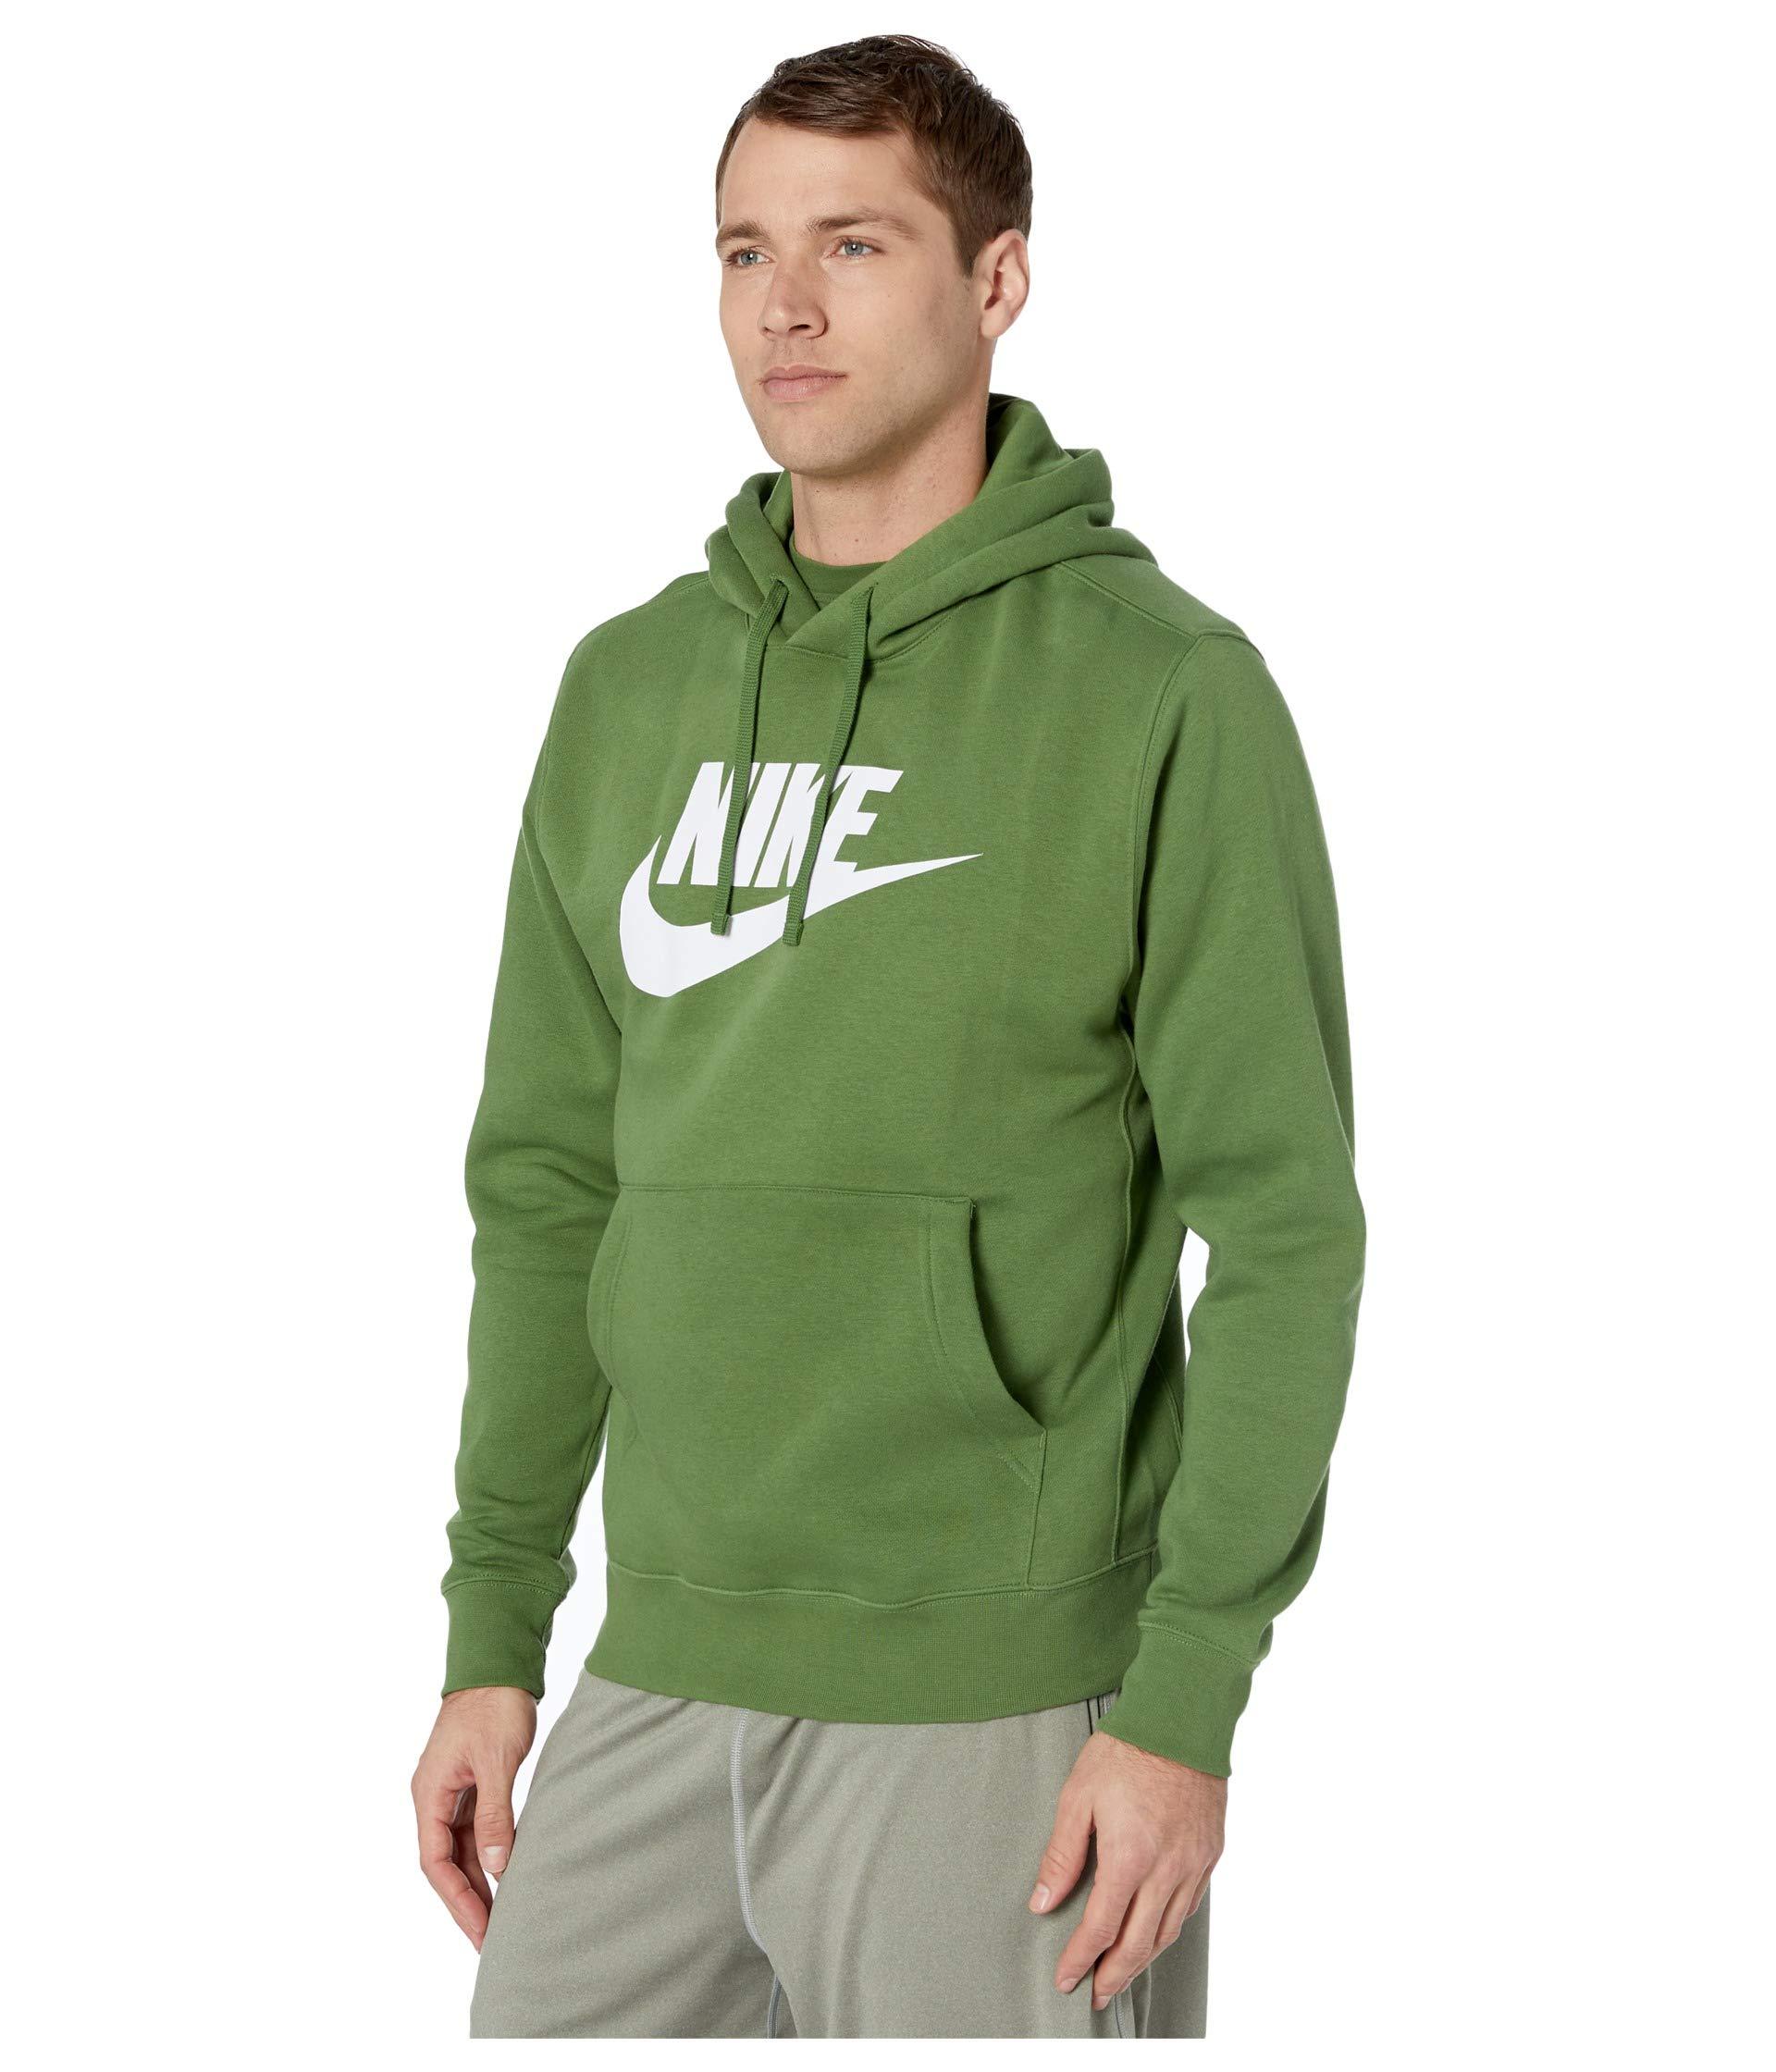 Nike Cotton Nsw Club Hoodie Pullover Graphics in Green for Men - Lyst